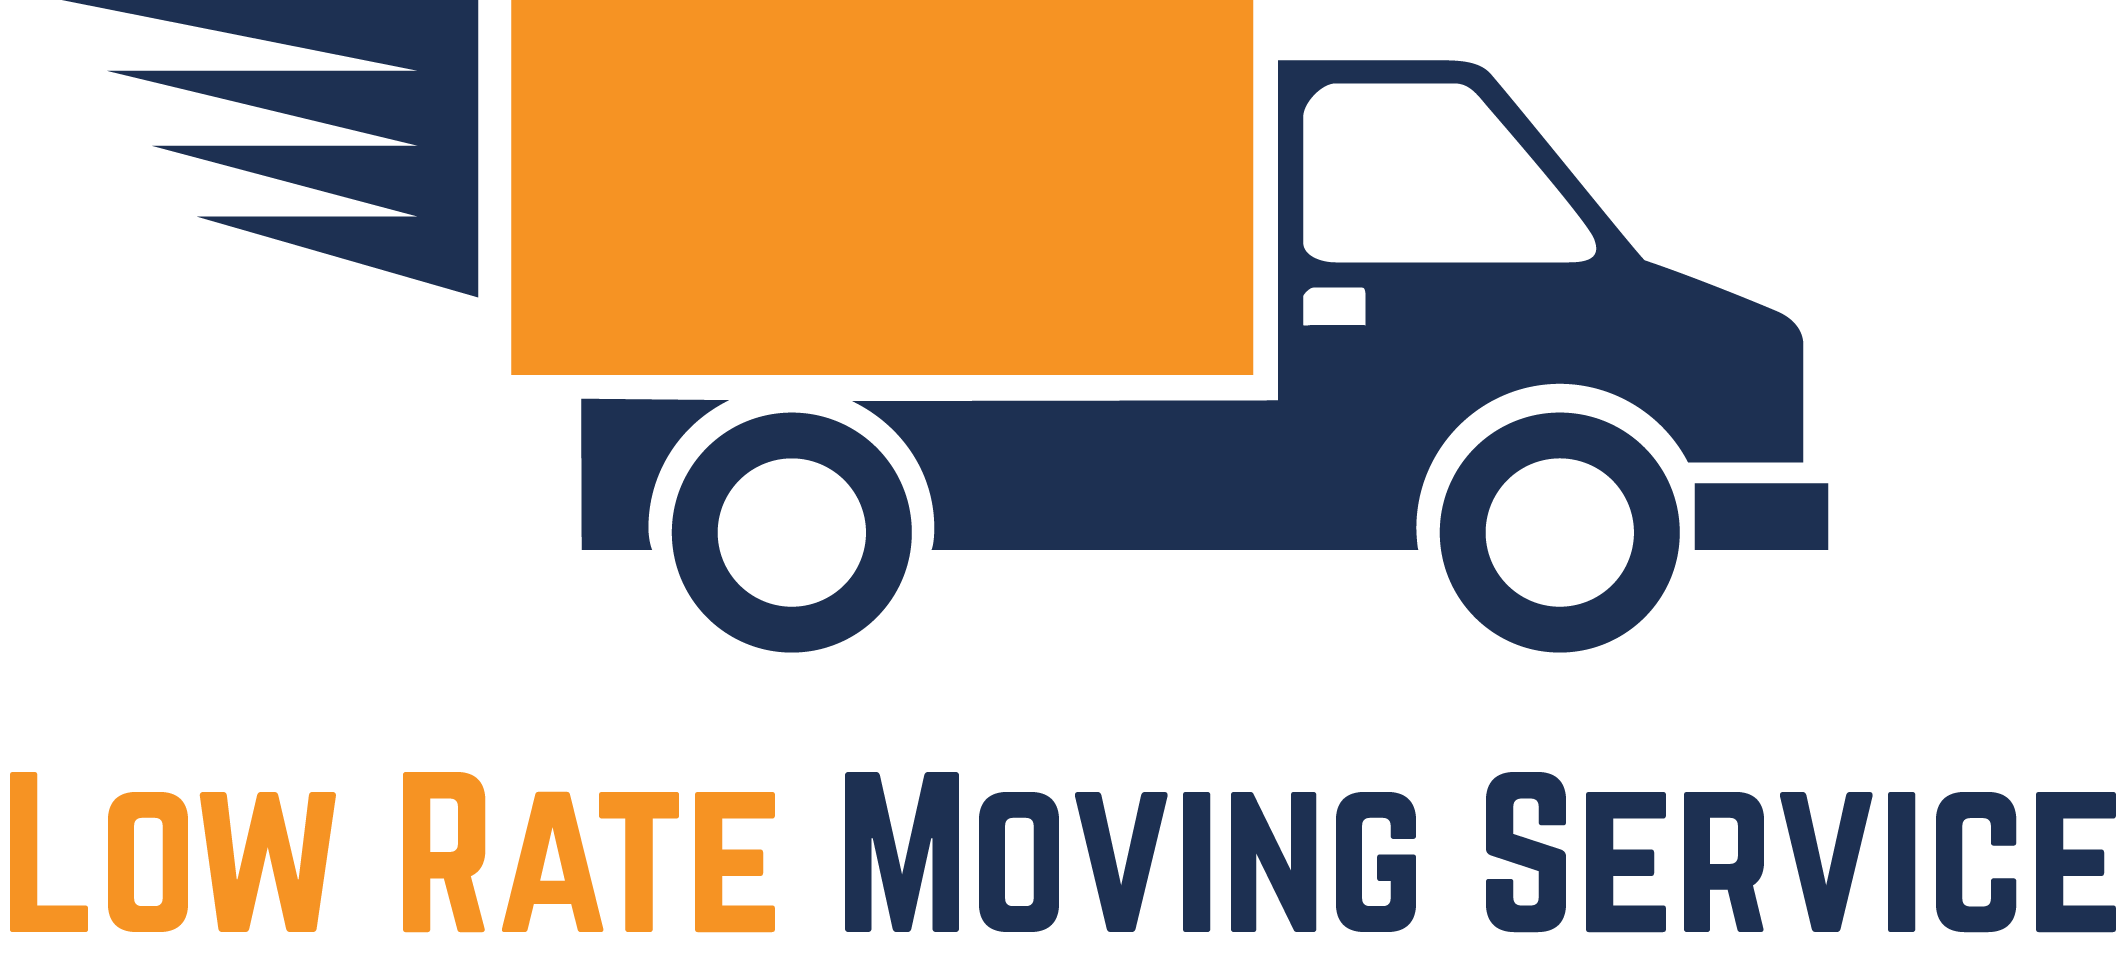 Low Cost Movers logo